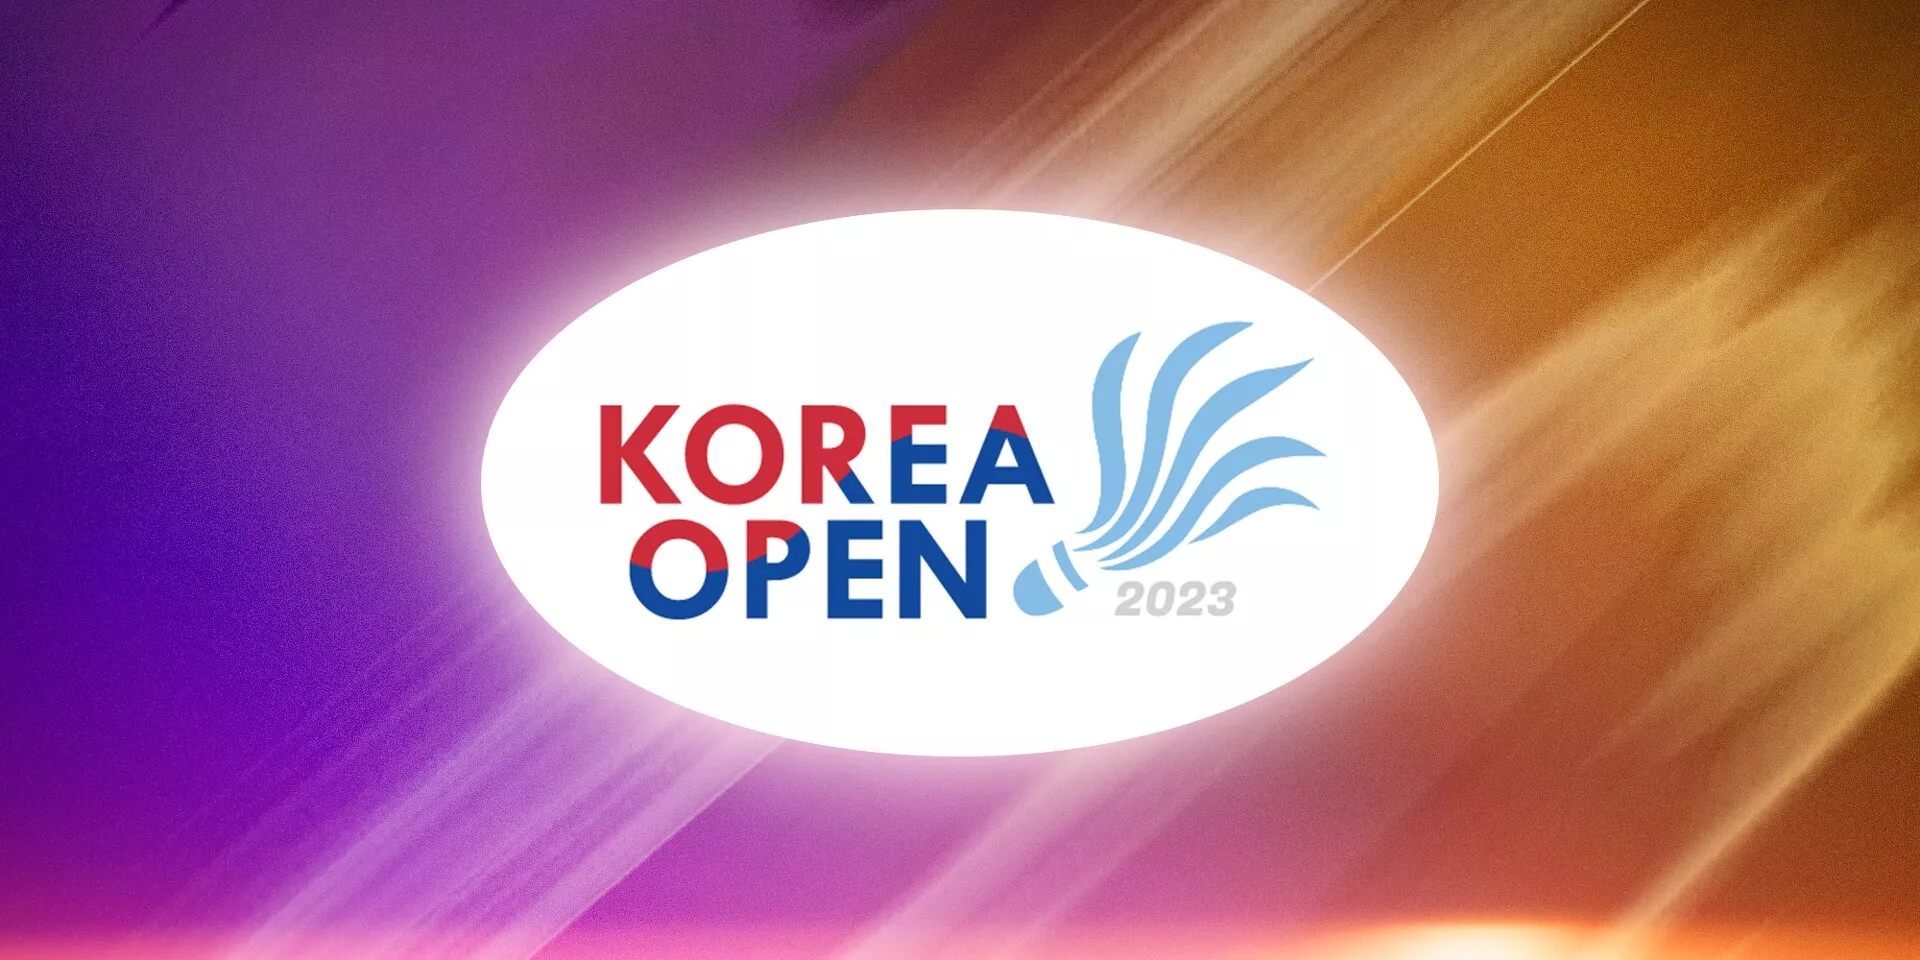 Where and how to watch Korea Open 2023 in Malaysia?